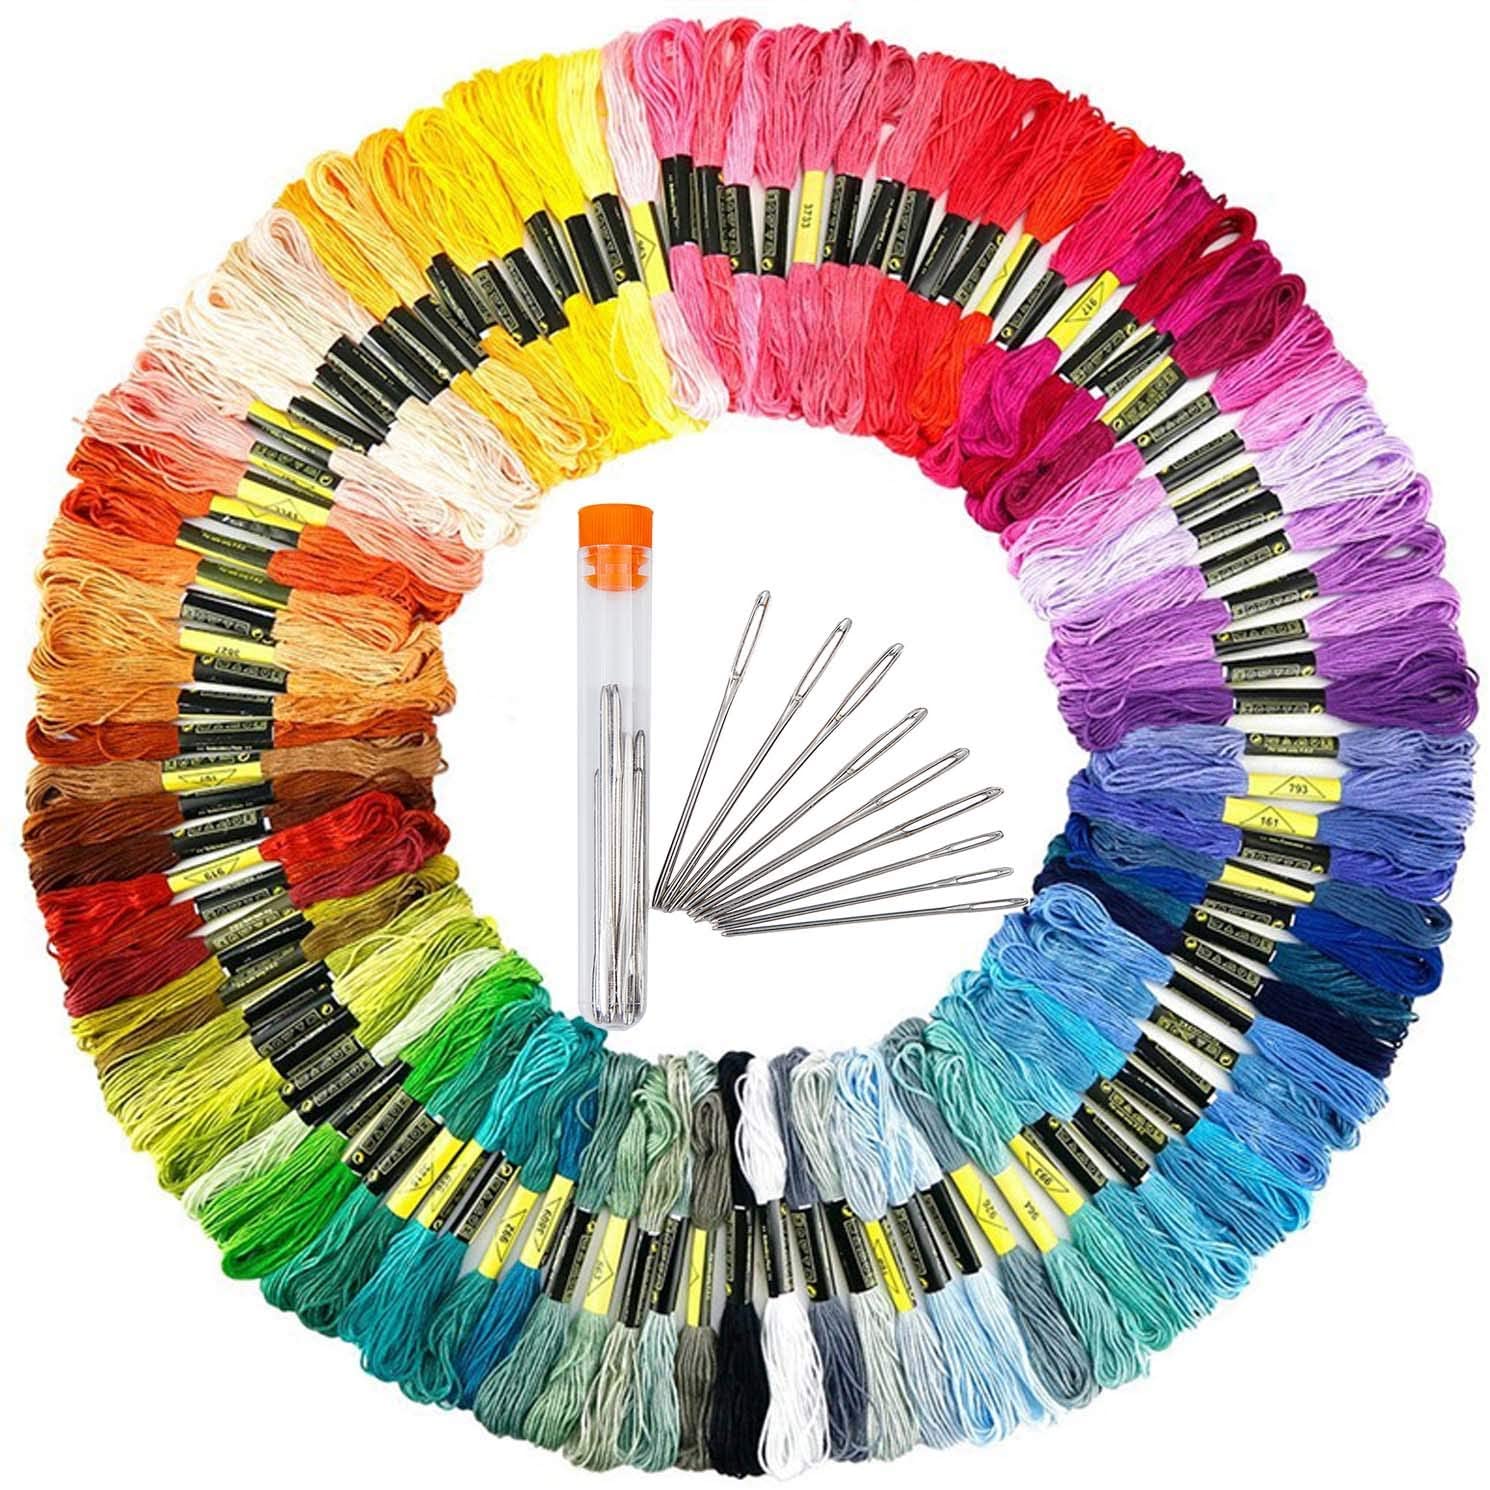 Embroidery Kit Cross Stitch Tool 100 Colors ,Embroidery Needles Threads,Embroidery Starter kit for Beginners, DIY Friendship Bracelets String Art Crafts - image 1 of 8